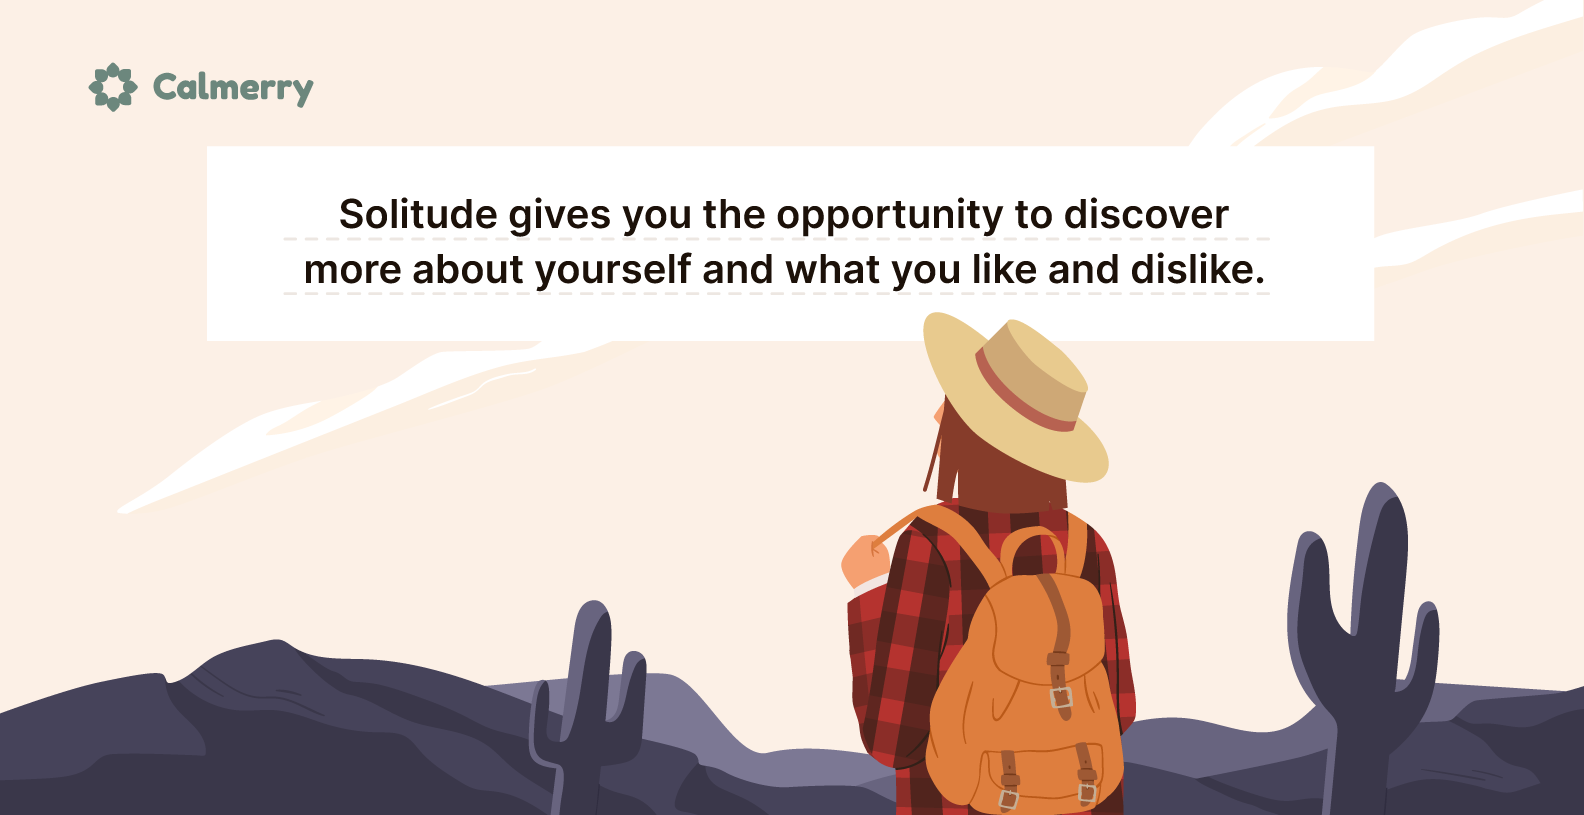 Solitude gives you the opportunity to discover more about yourself